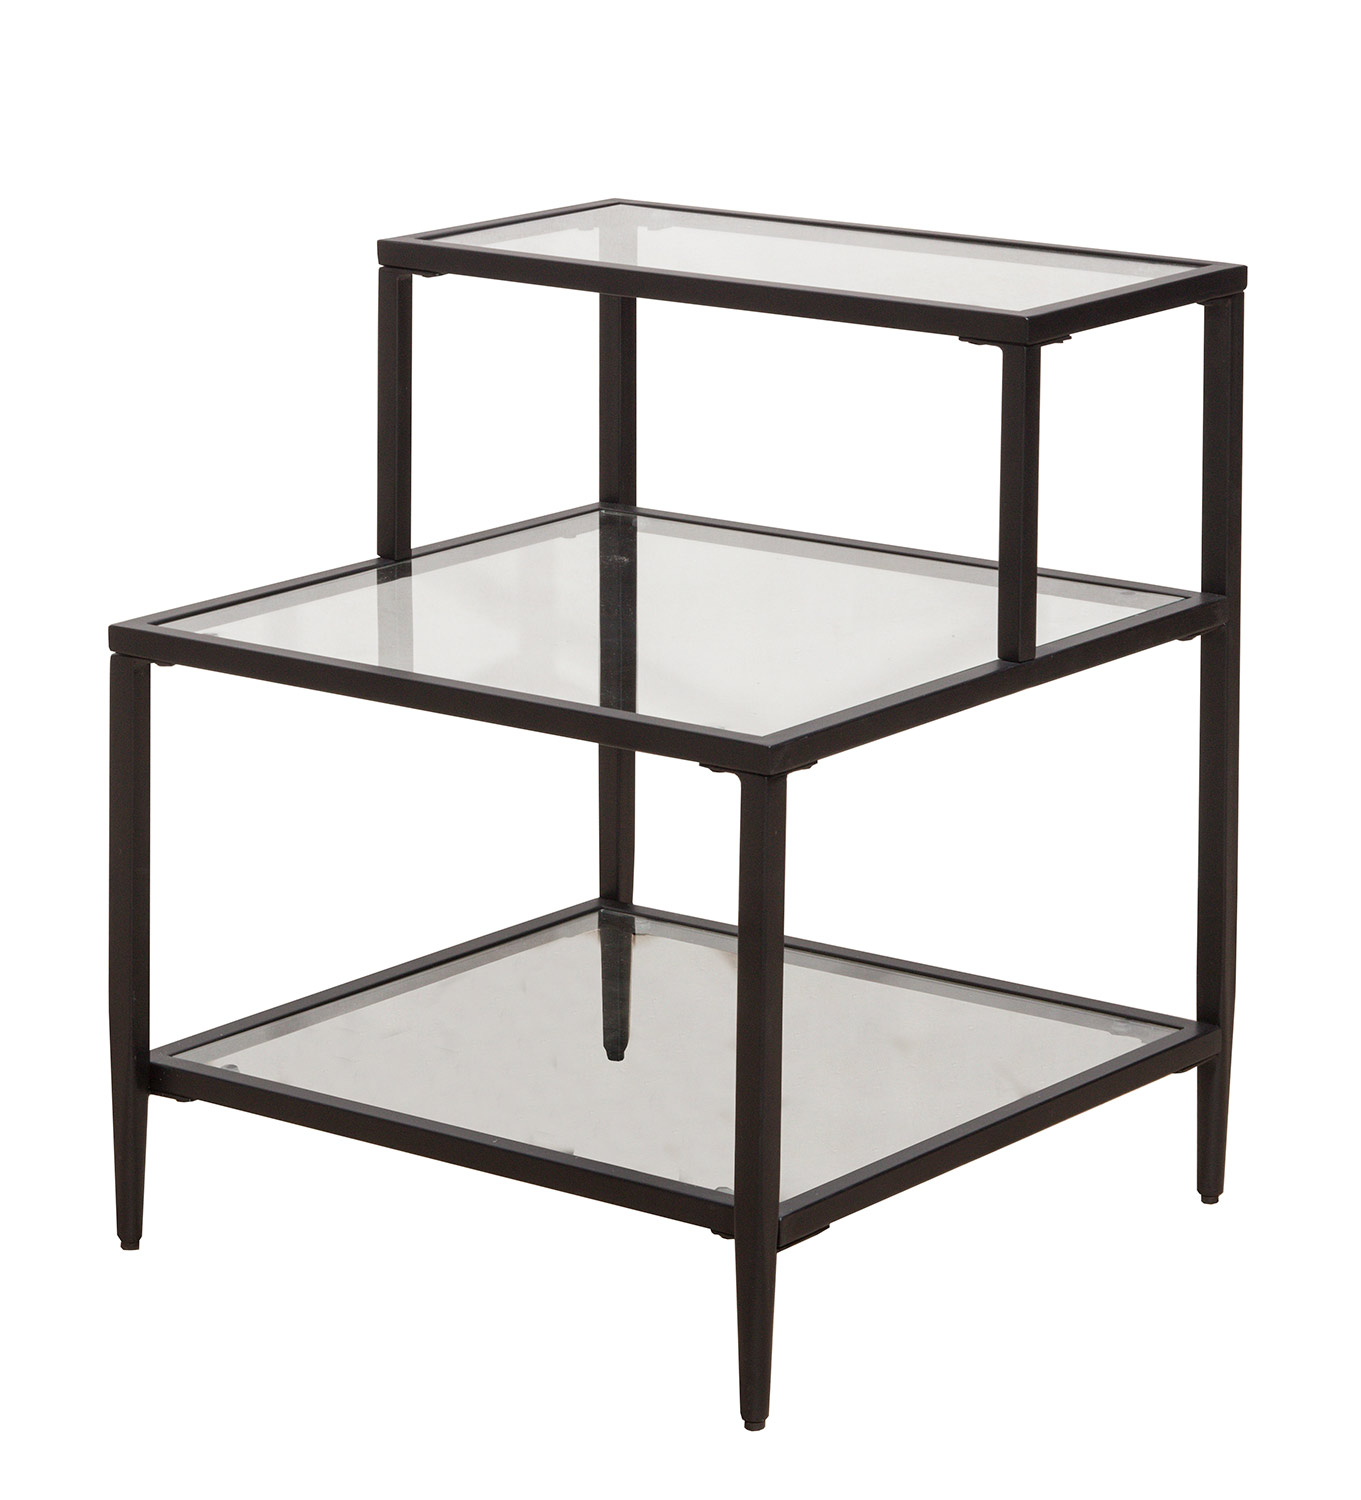 Hillsdale Harlan 3-Tier End Table with 2-Large and 1-Small Glass Shelves - Black